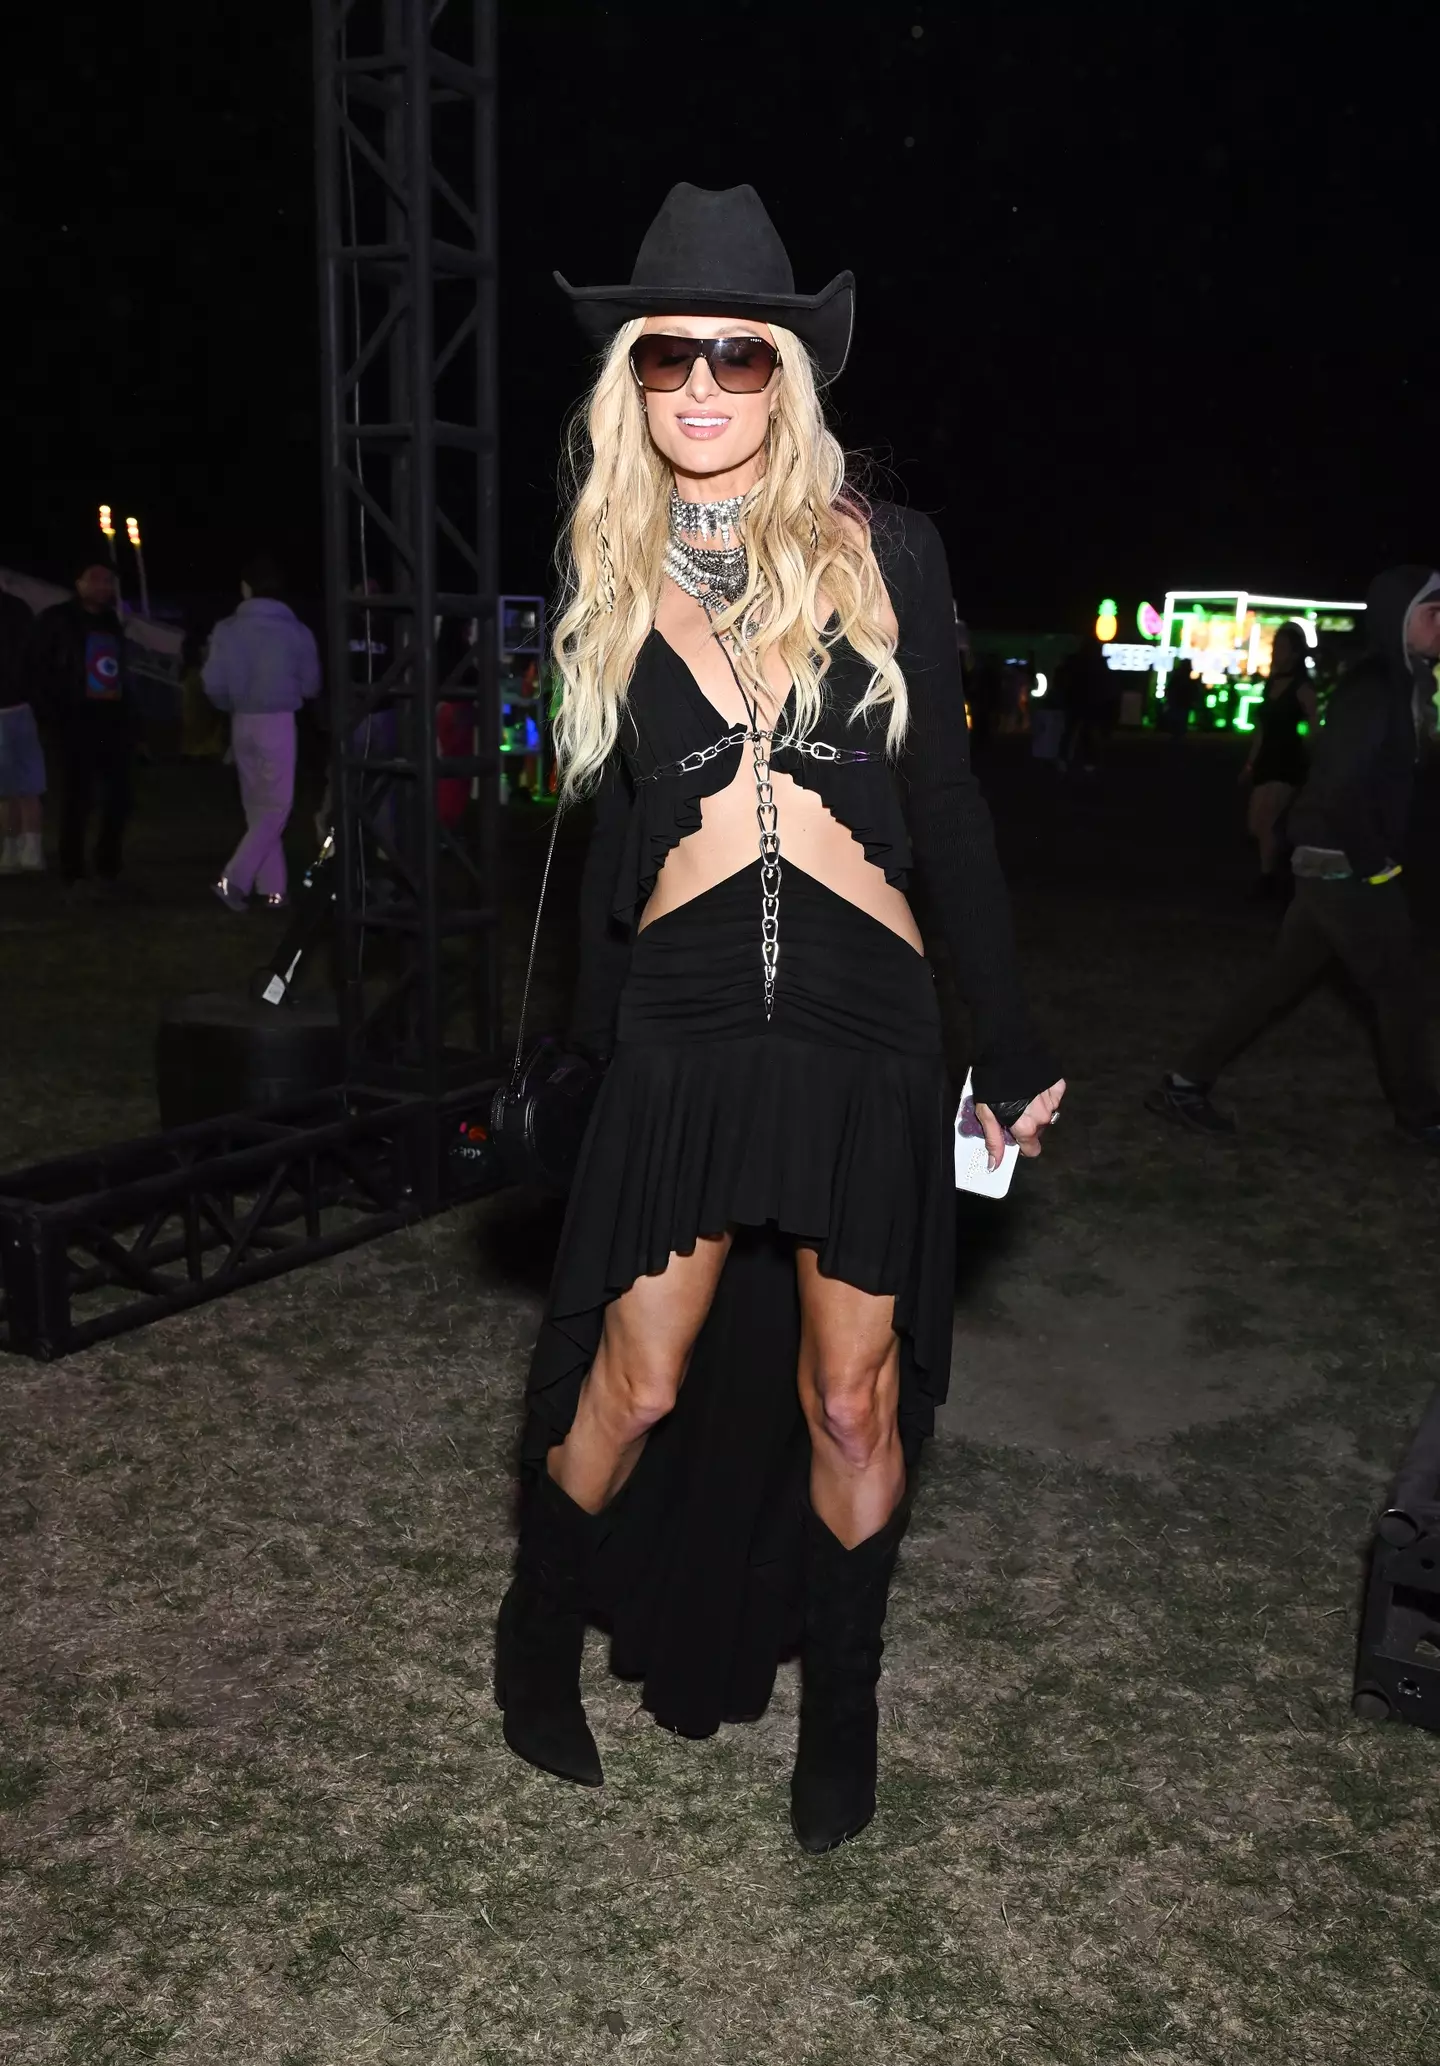 Paris Hilton was apparently 'kicked out' of the VIP area. (Gilbert Flores/WWD via Getty Images)